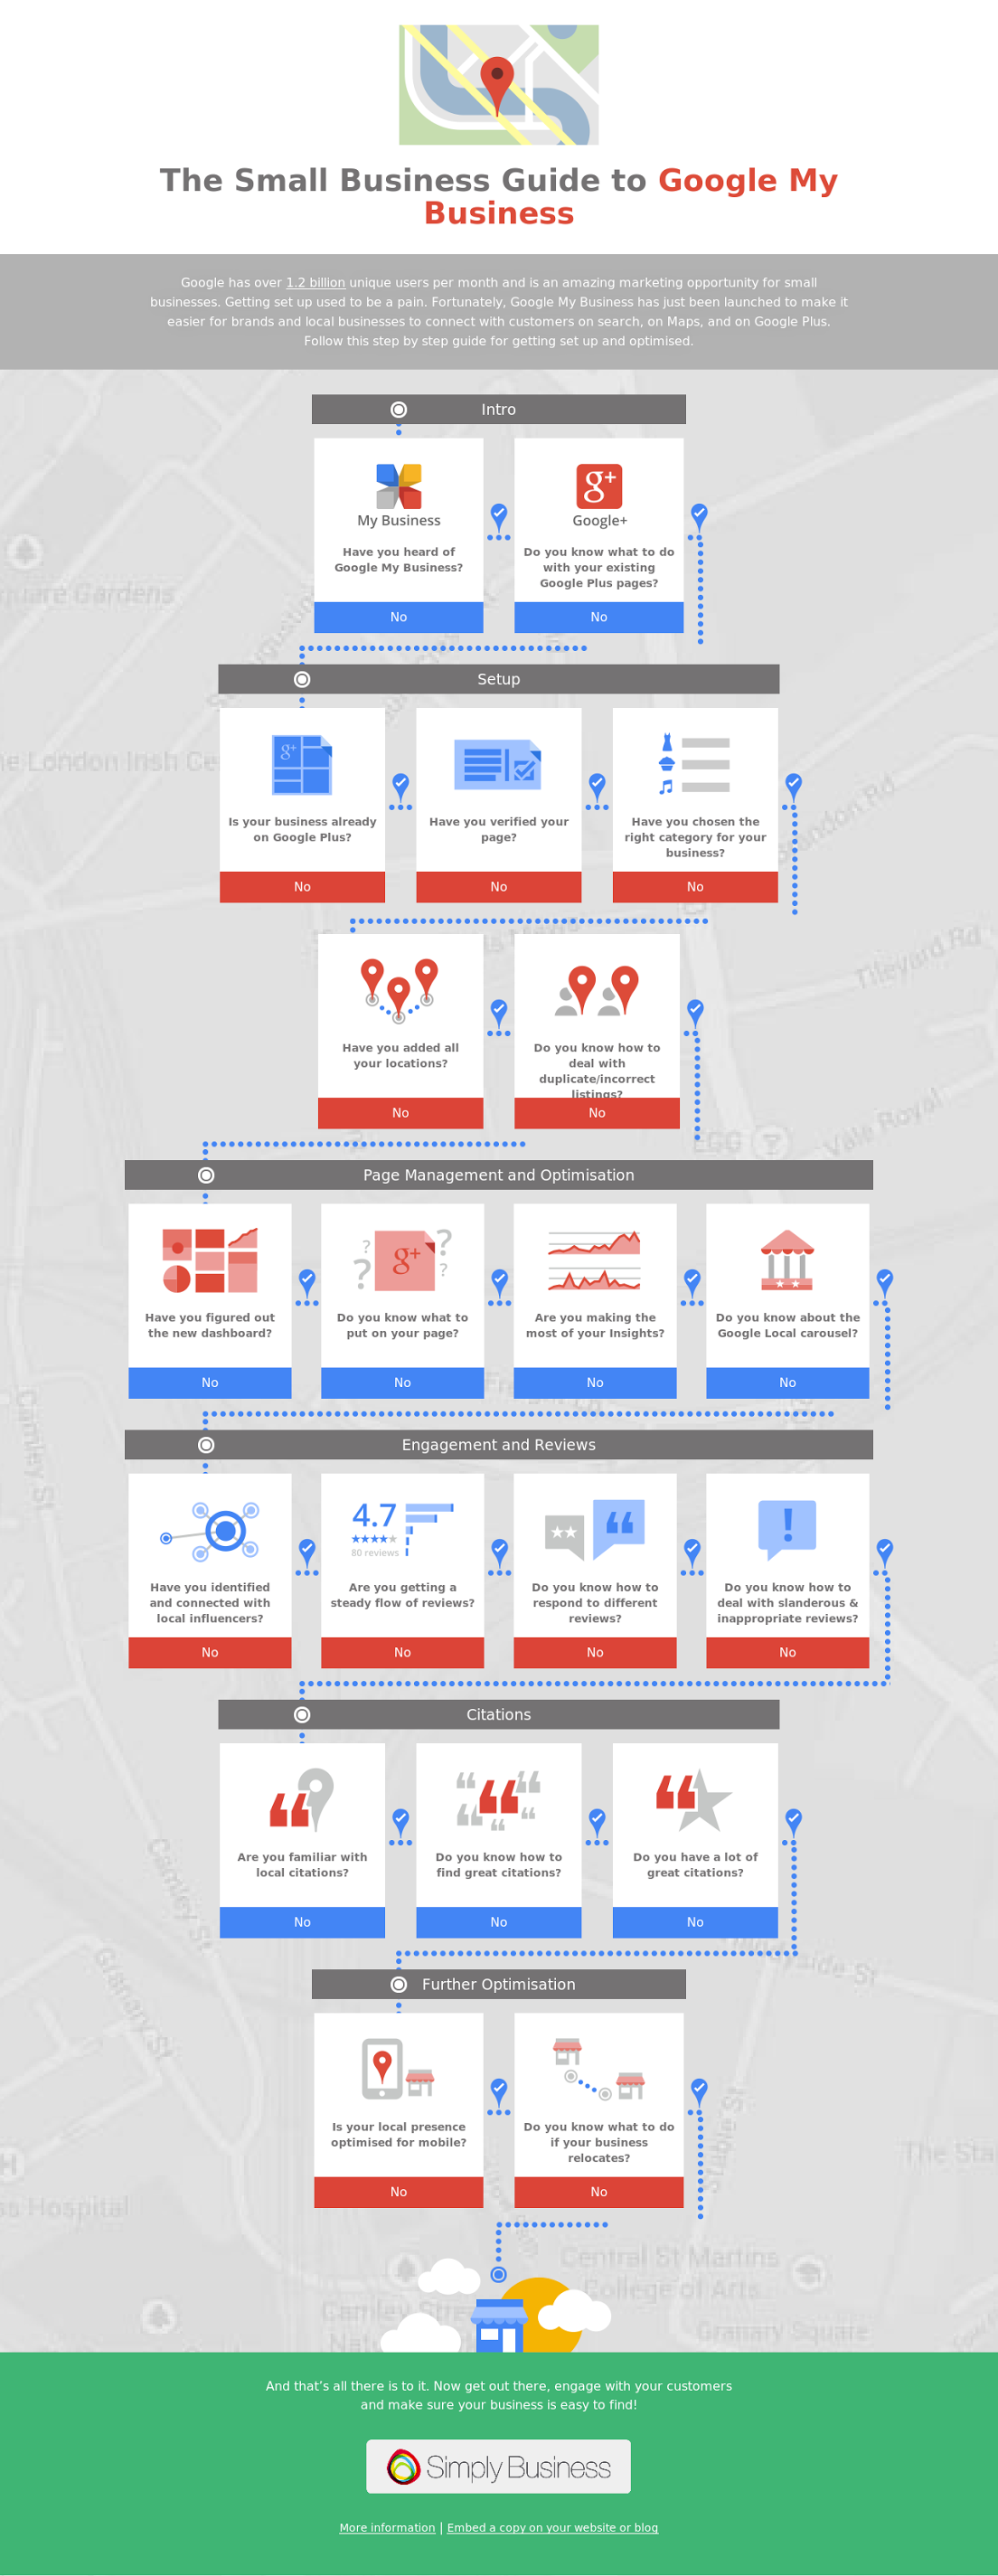 What is Google My Business and How Can Small Businesses Make the Most of It? #infographic #socialmedia #Google #Googleplus